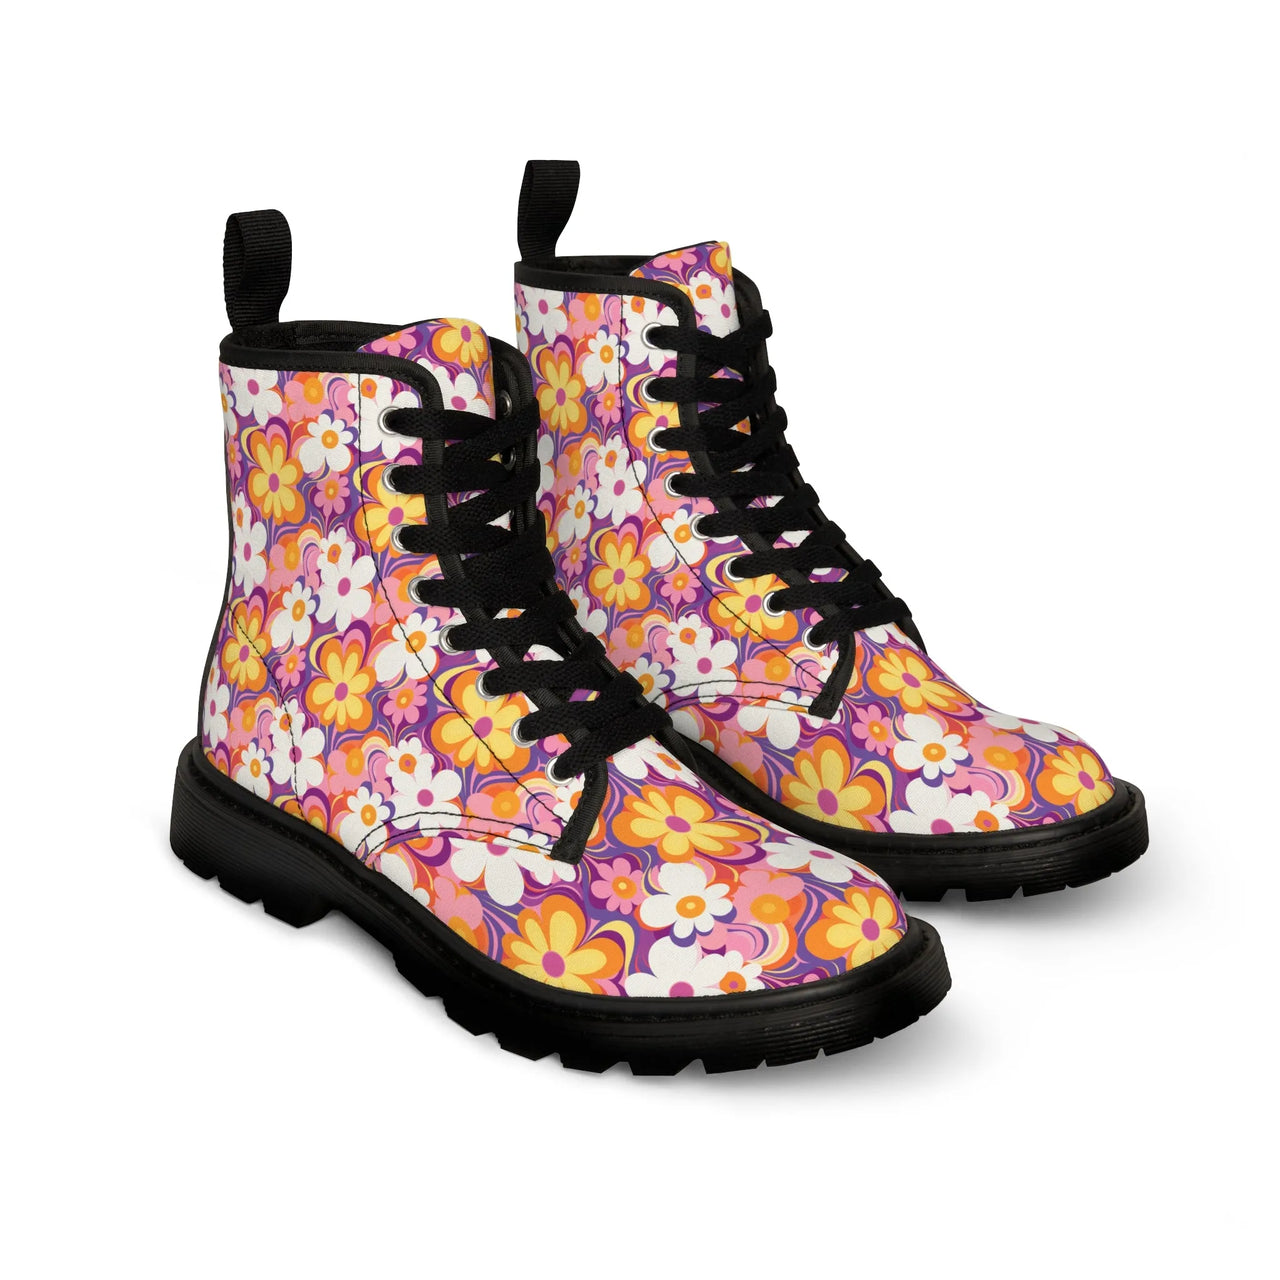 Groovy Garden Stroll: Retro '60s Inspired Floral Black Boots